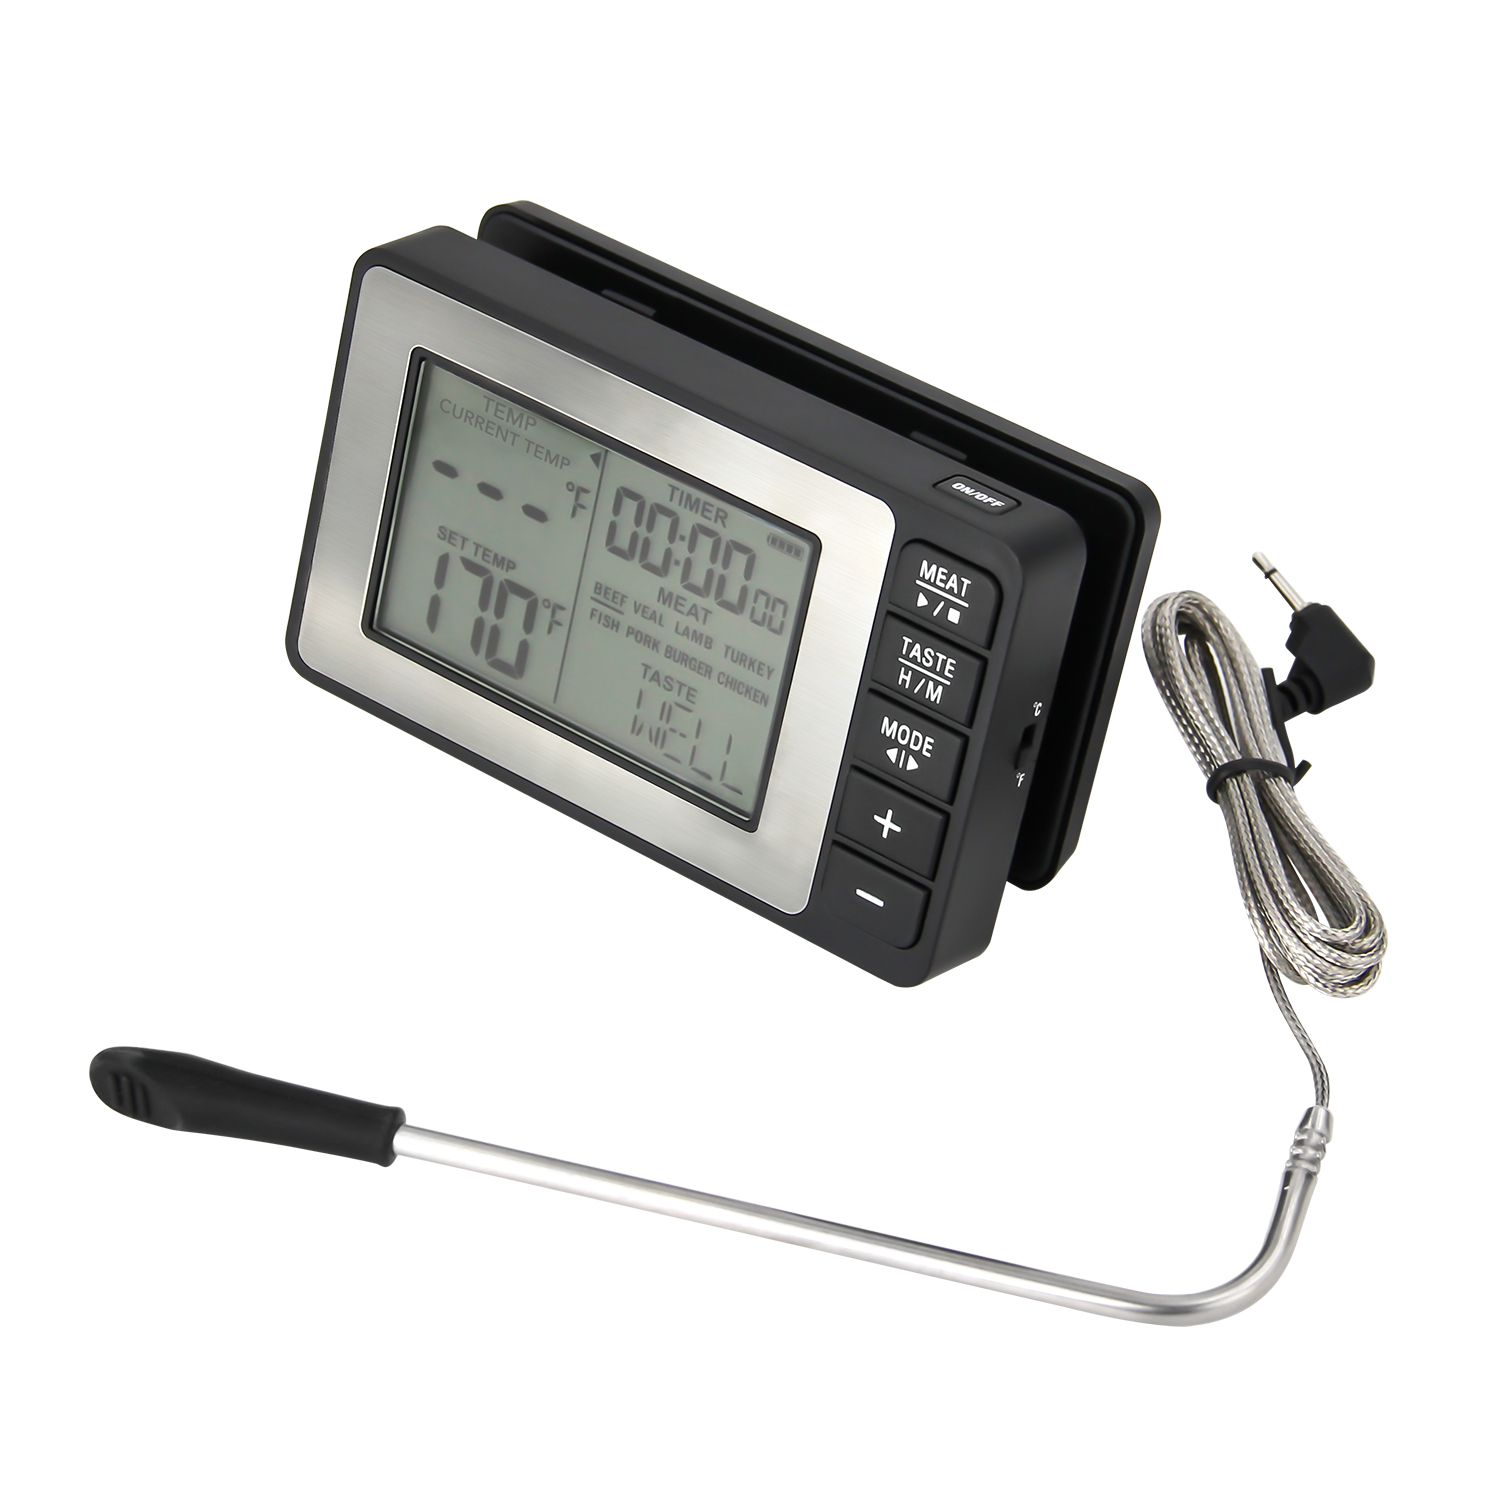 China Bluetooth Thermometer Manufacturer